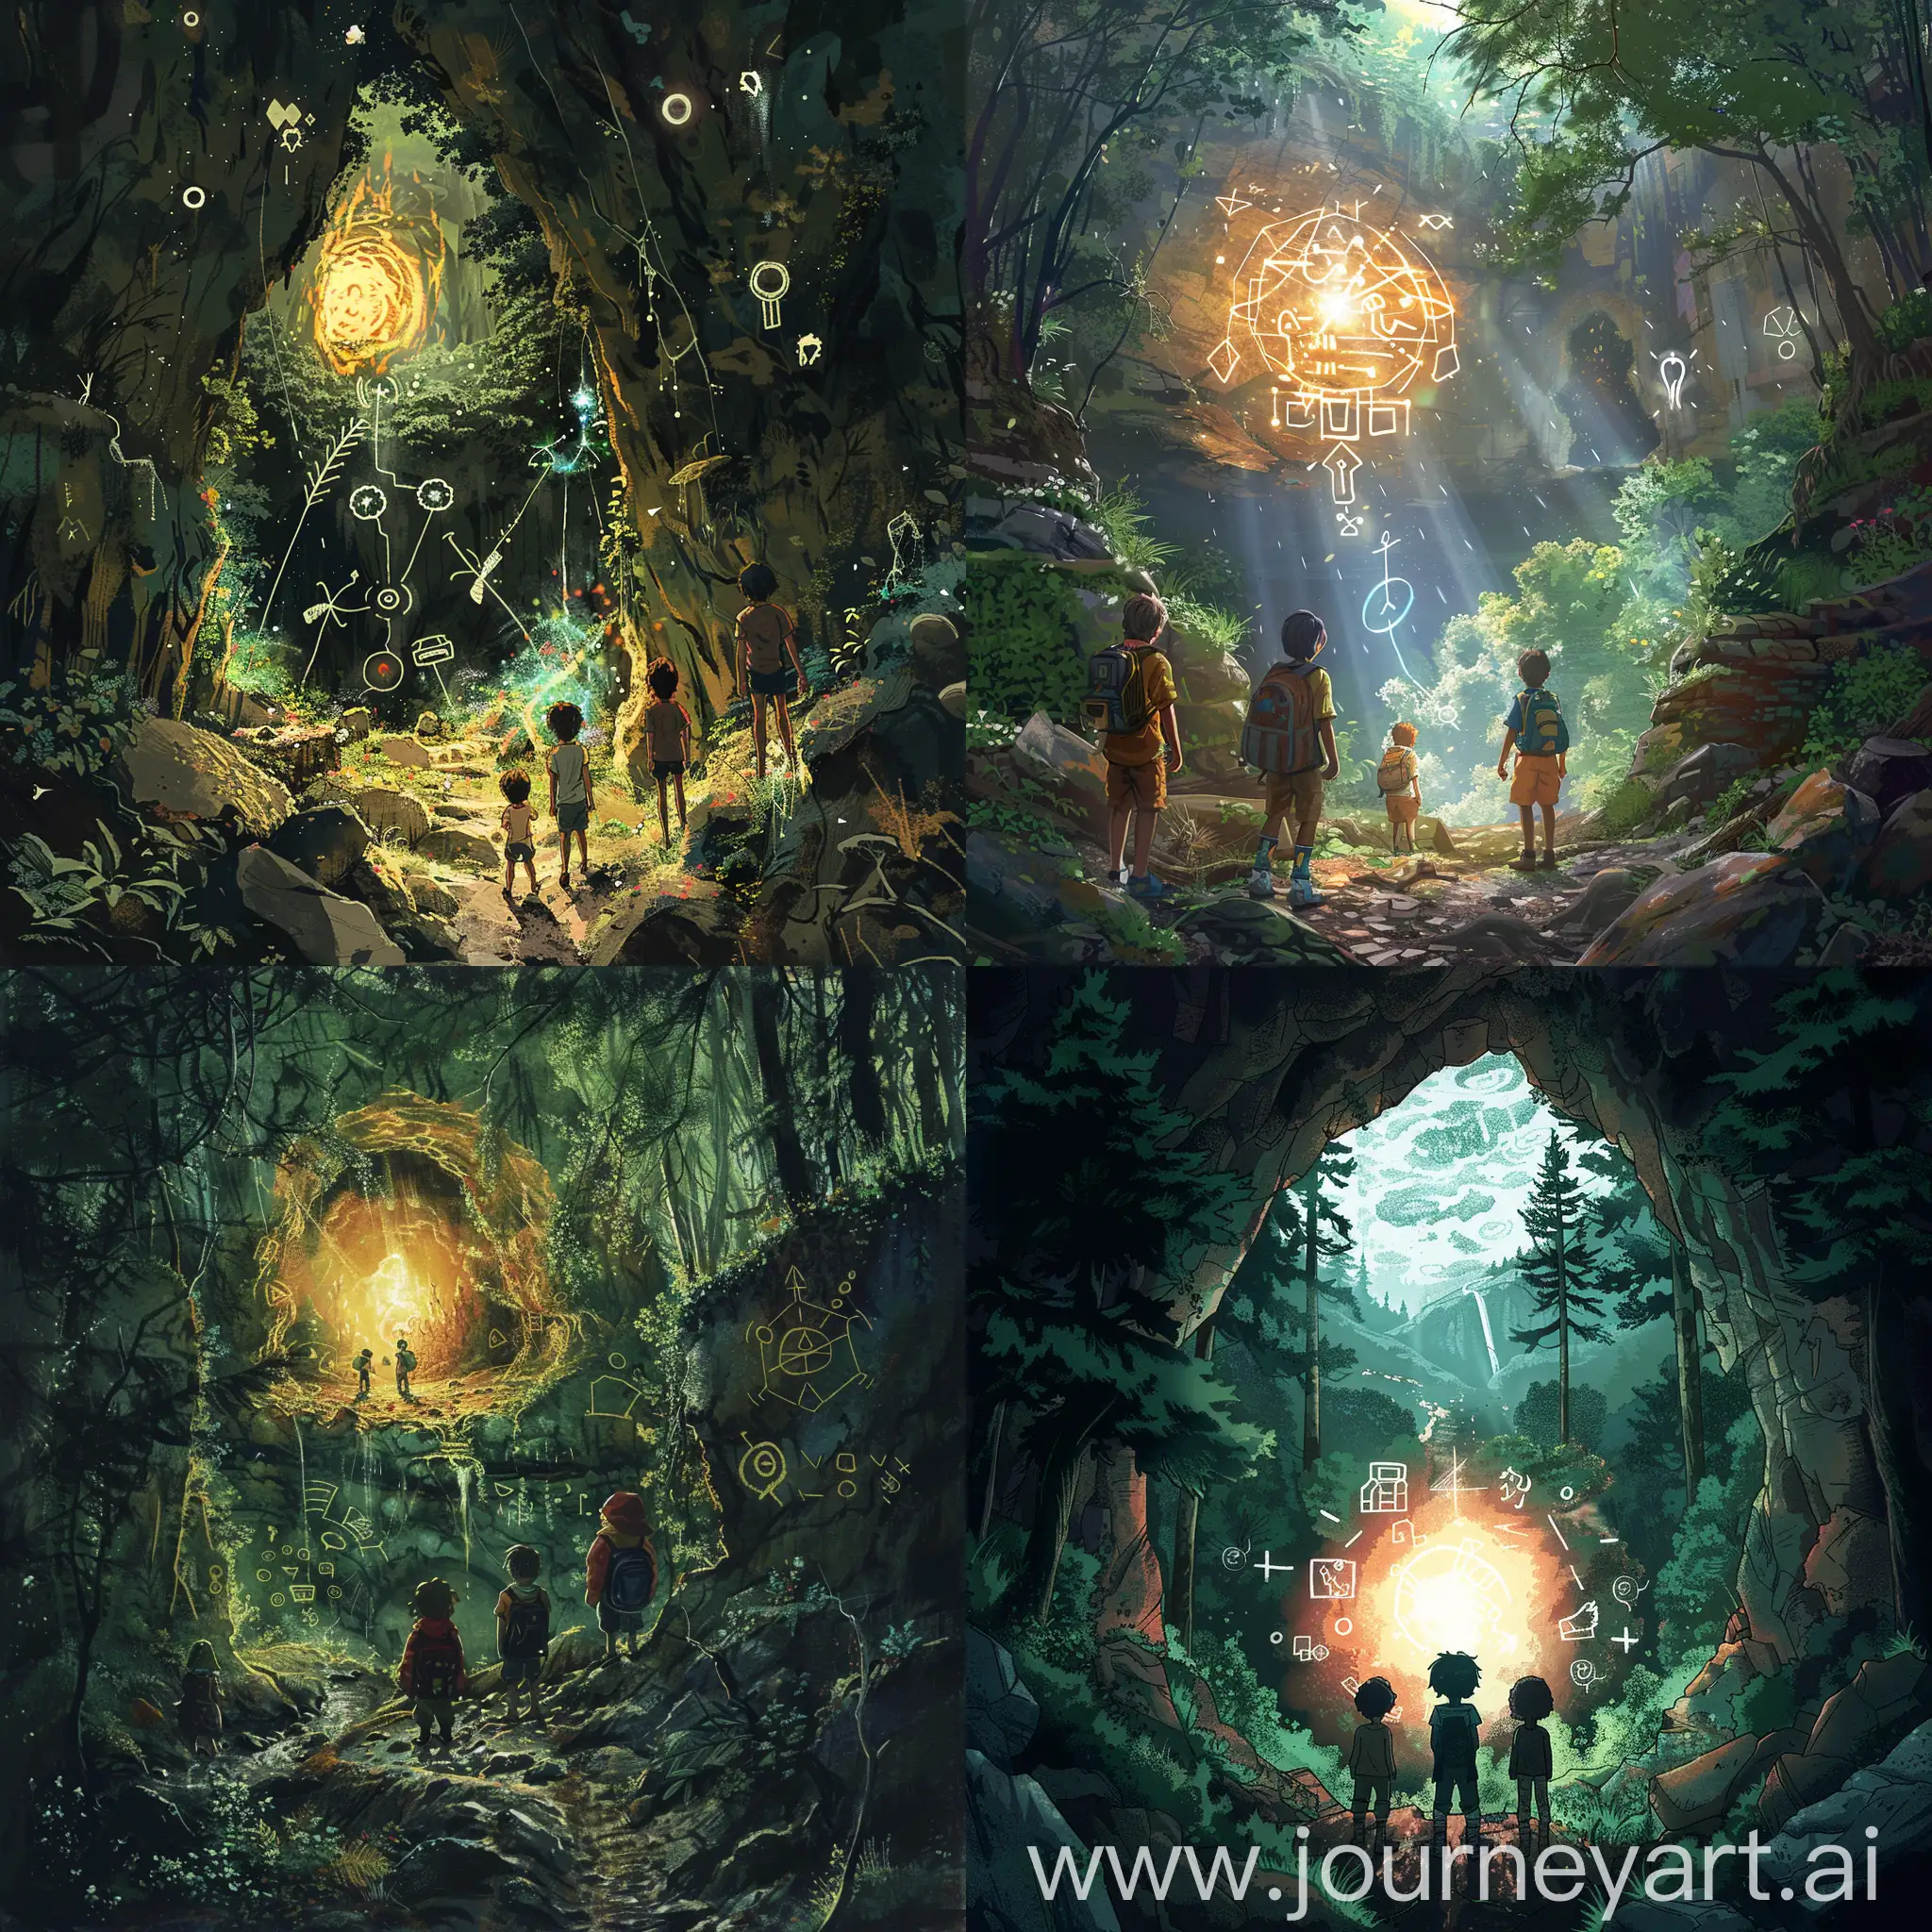 The friends venture into the forest and stumble upon strange symbols and signs pointing to something mysterious. In the midst of a wooded ravine, they discover a cave filled with a glowing light.